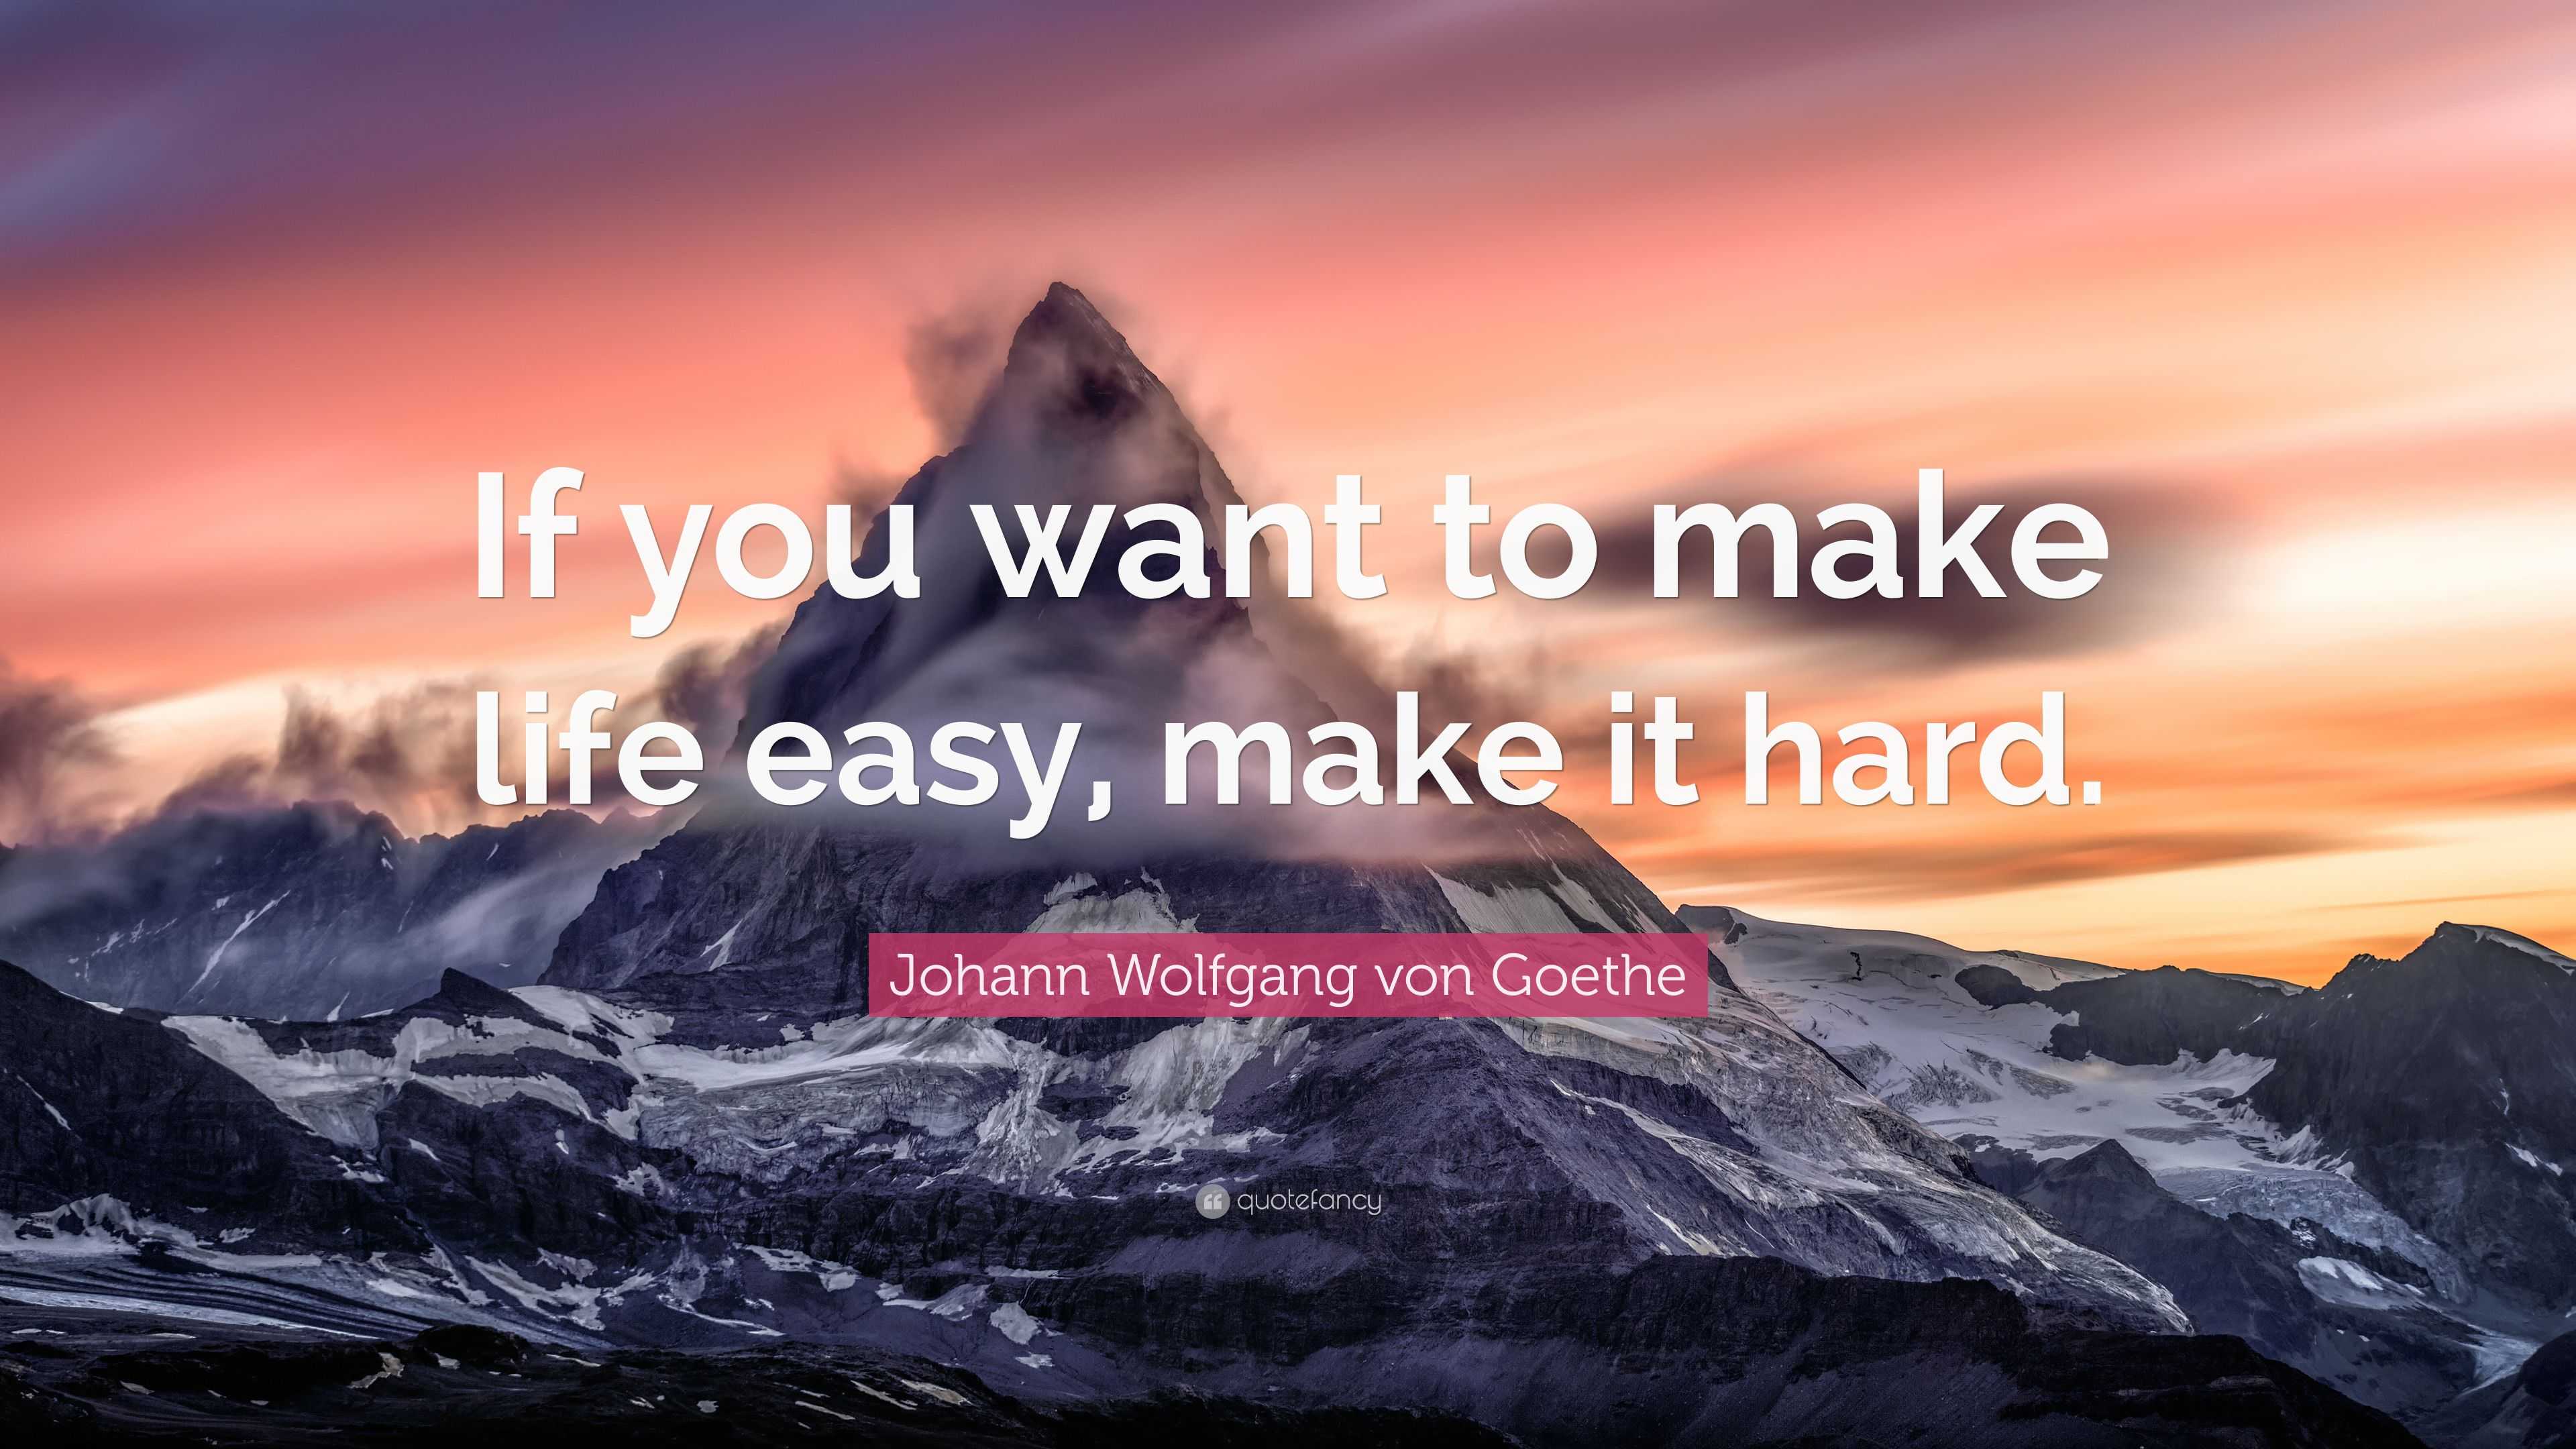 https://quotefancy.com/media/wallpaper/3840x2160/2058080-Johann-Wolfgang-von-Goethe-Quote-If-you-want-to-make-life-easy.jpg